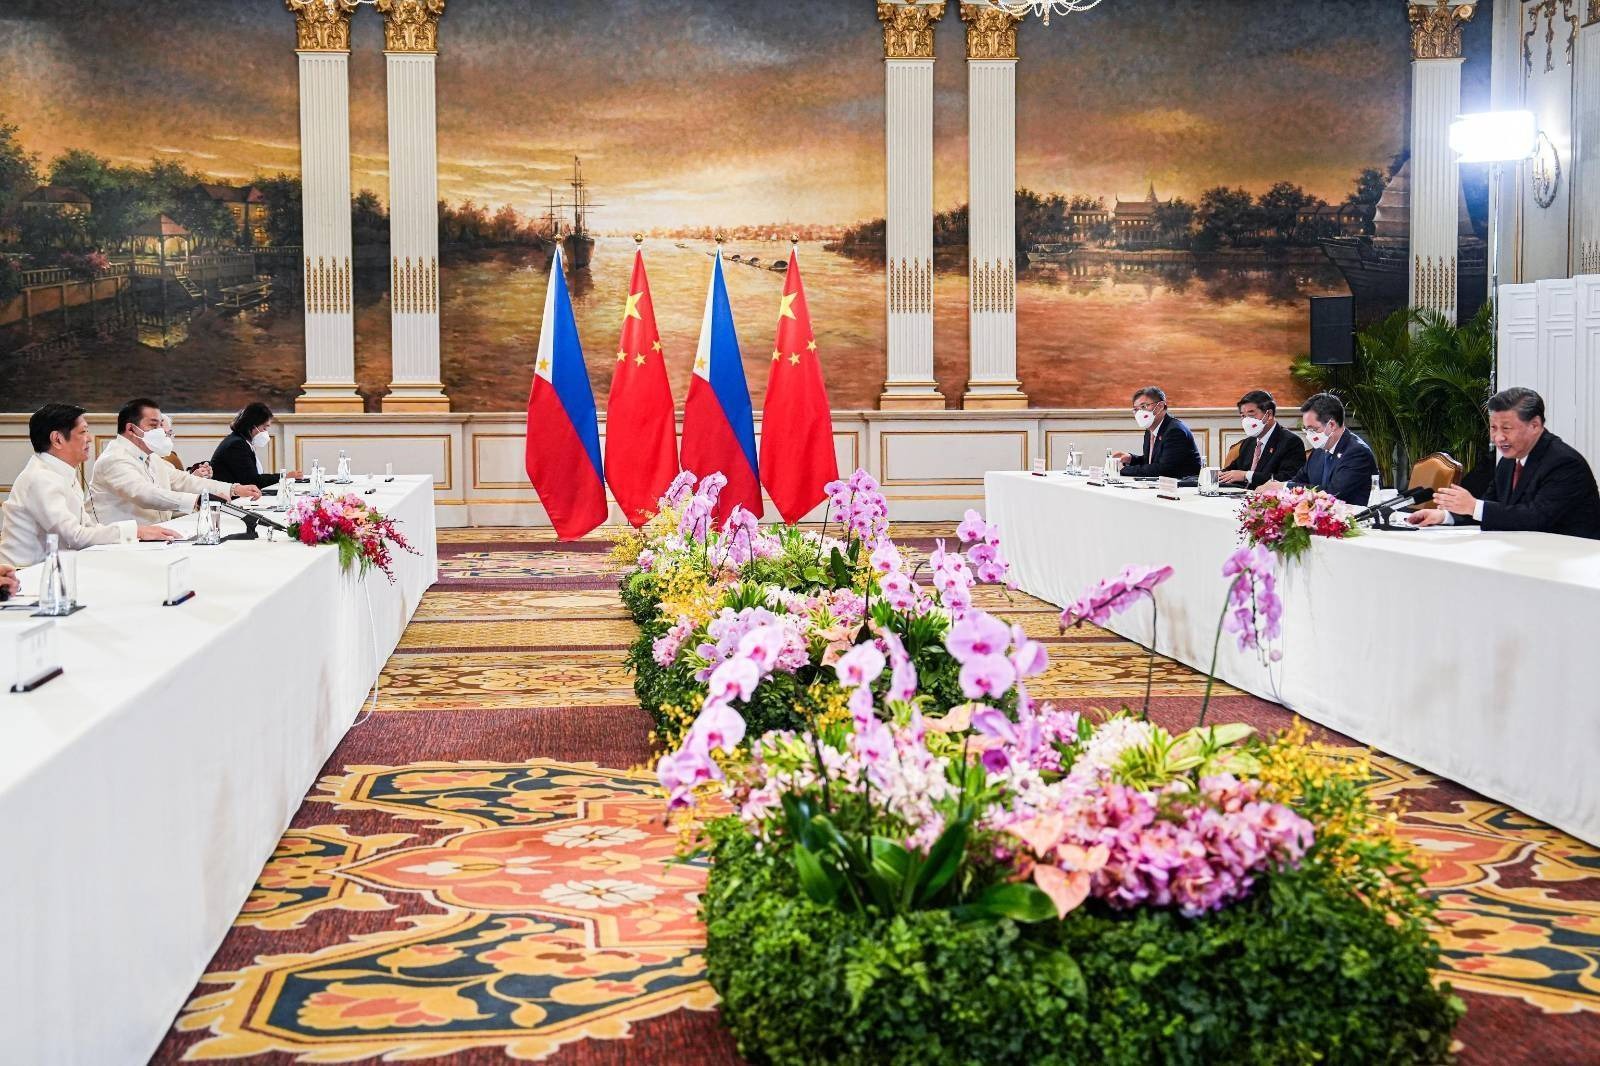 President Ferdinand R. Marcos Jr. bilateral meeting with Chinese President Xi Jinping